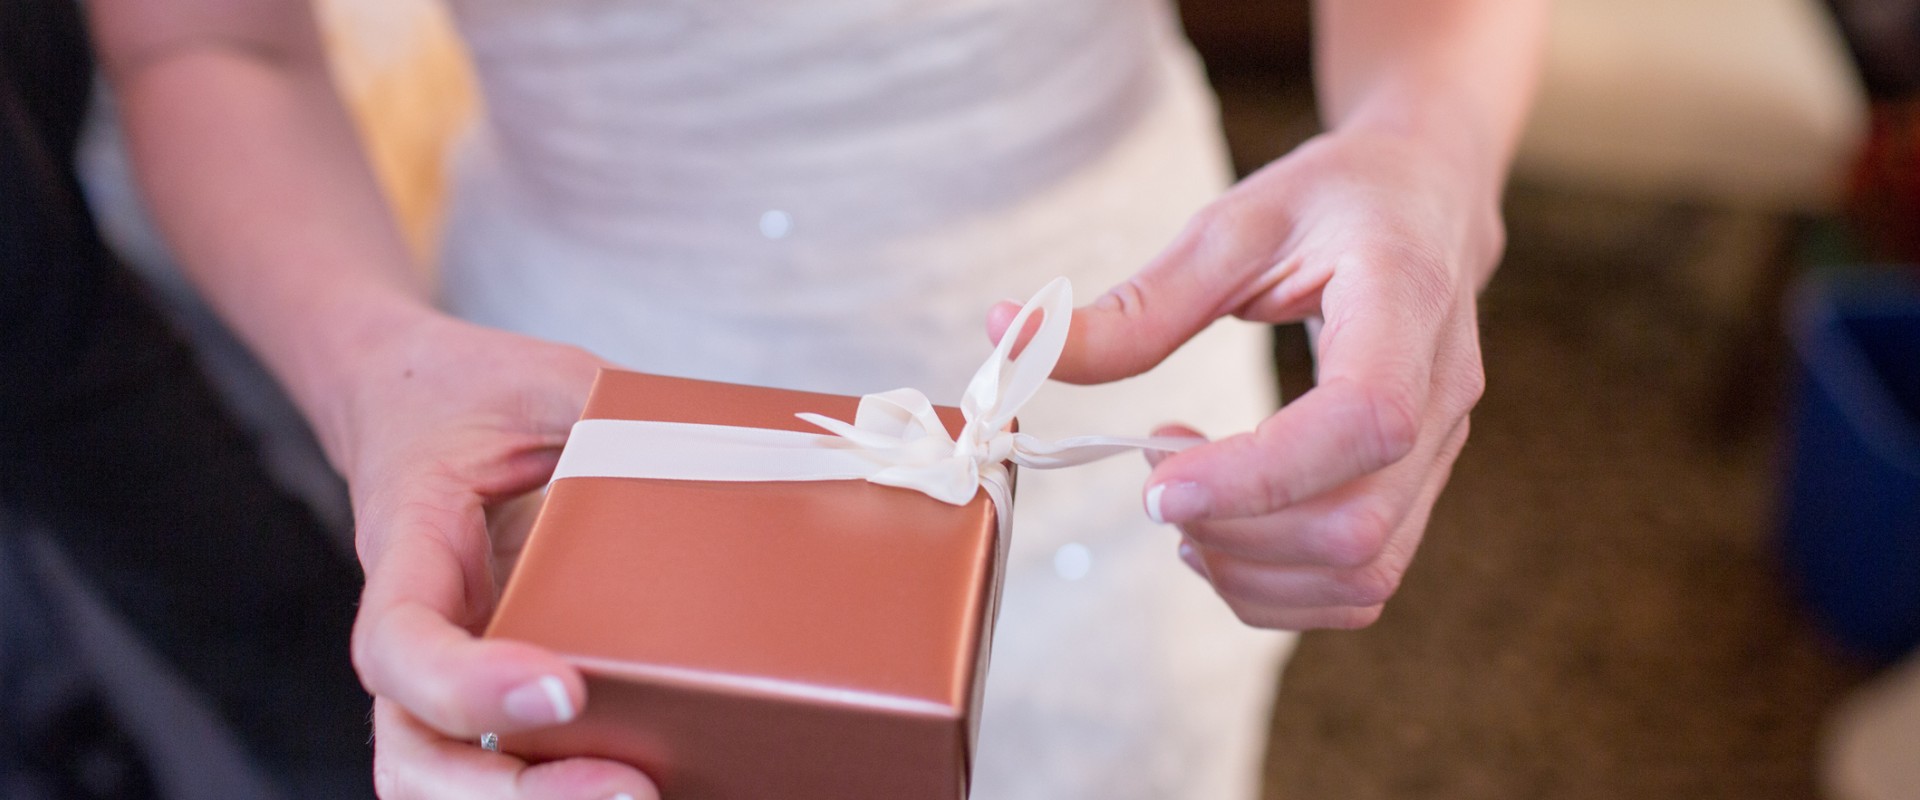 How Much Money Should the Bride's Parents Give as a Wedding Gift?